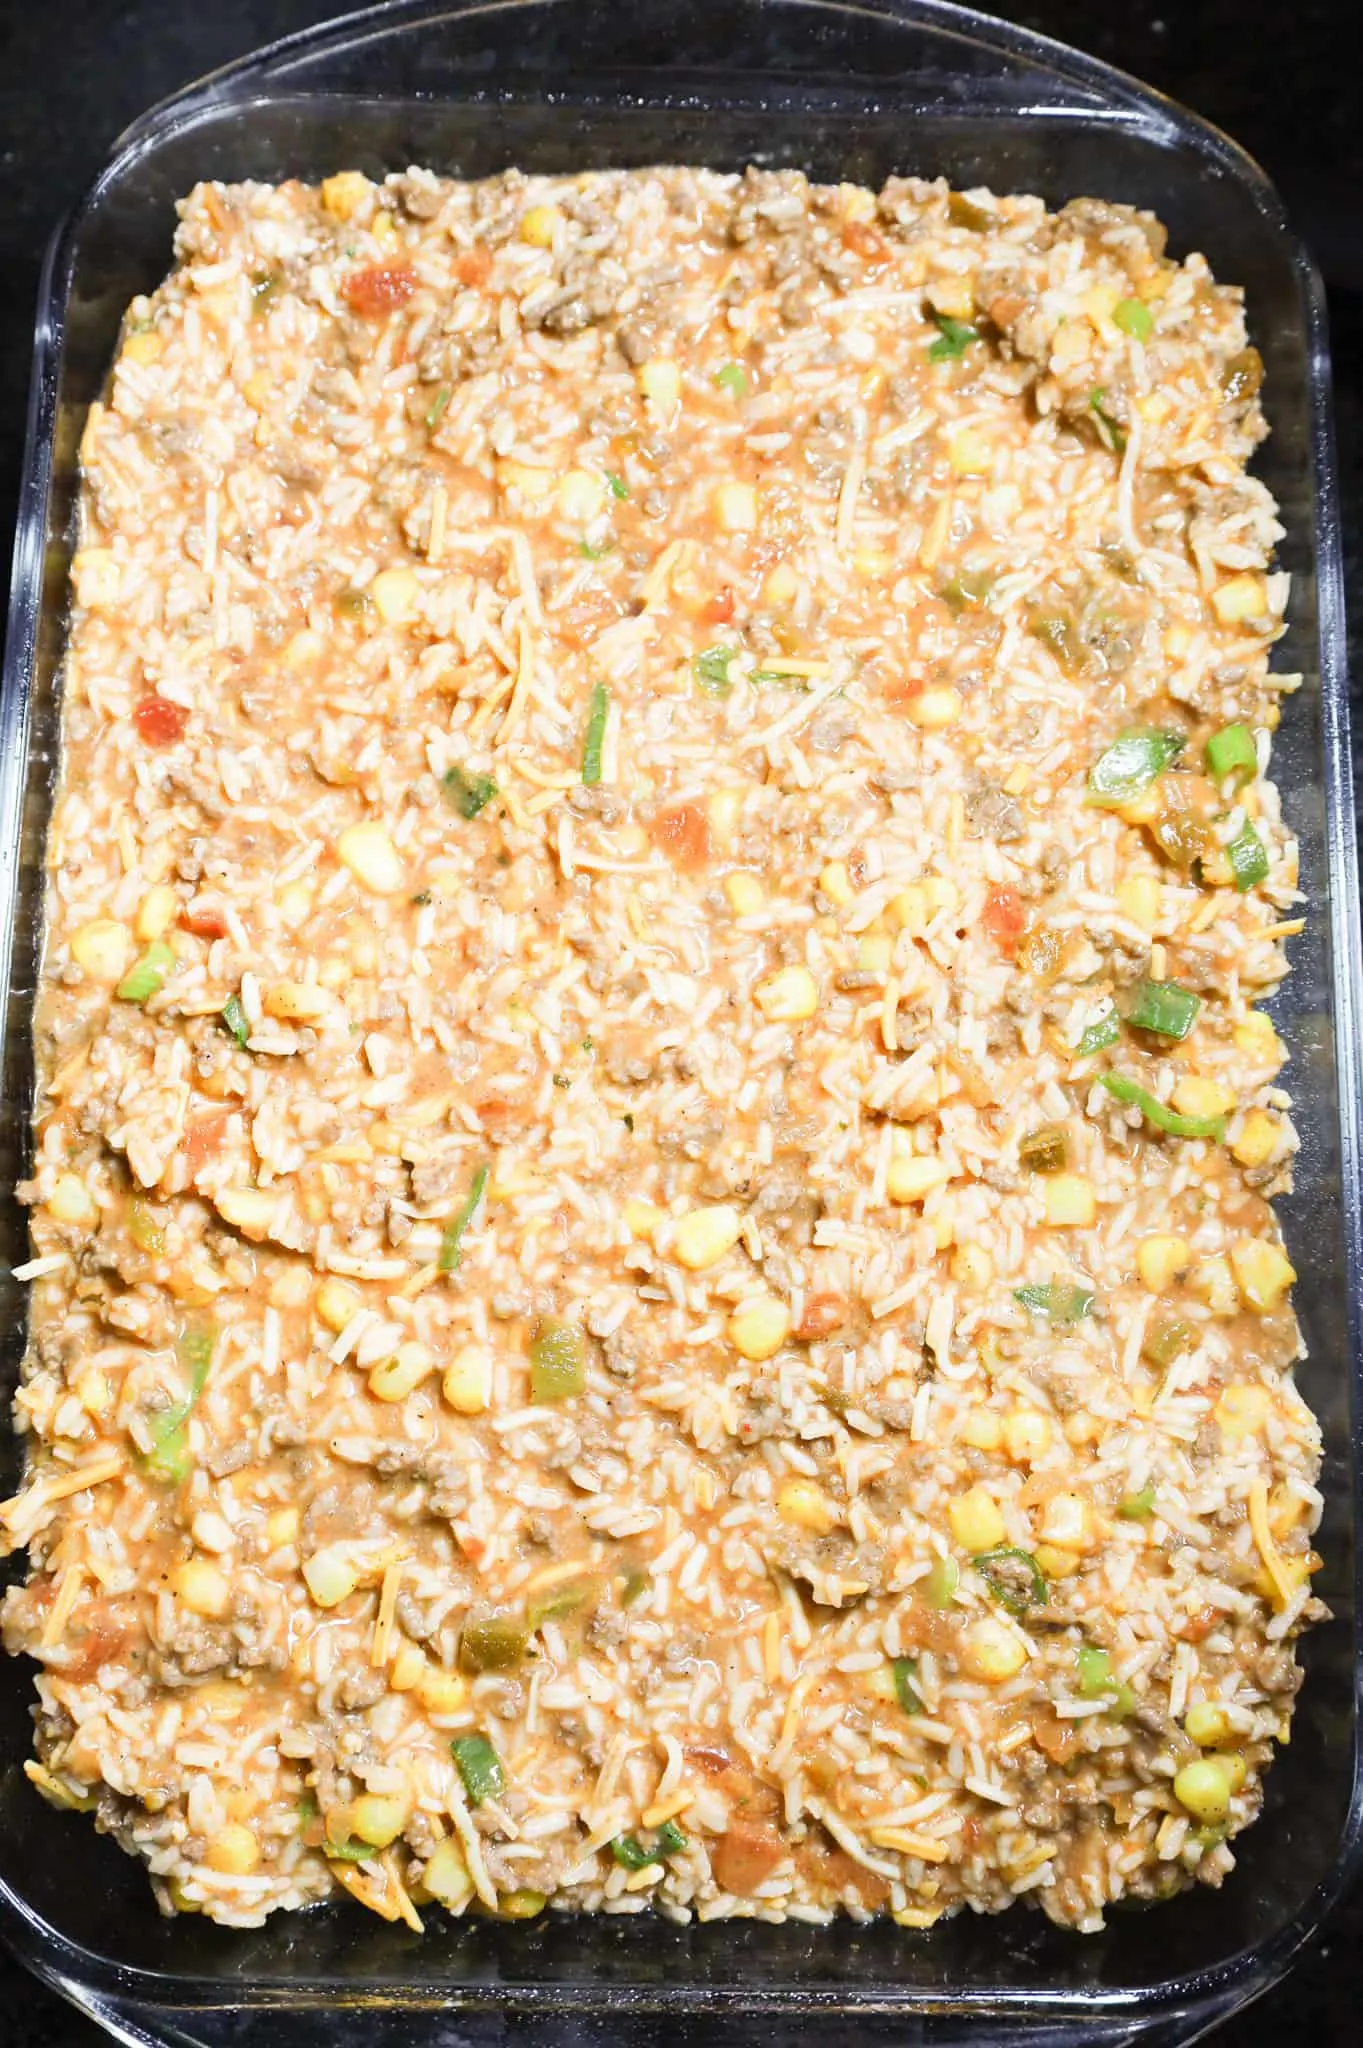 ground beef and rice mixture in a baking dish